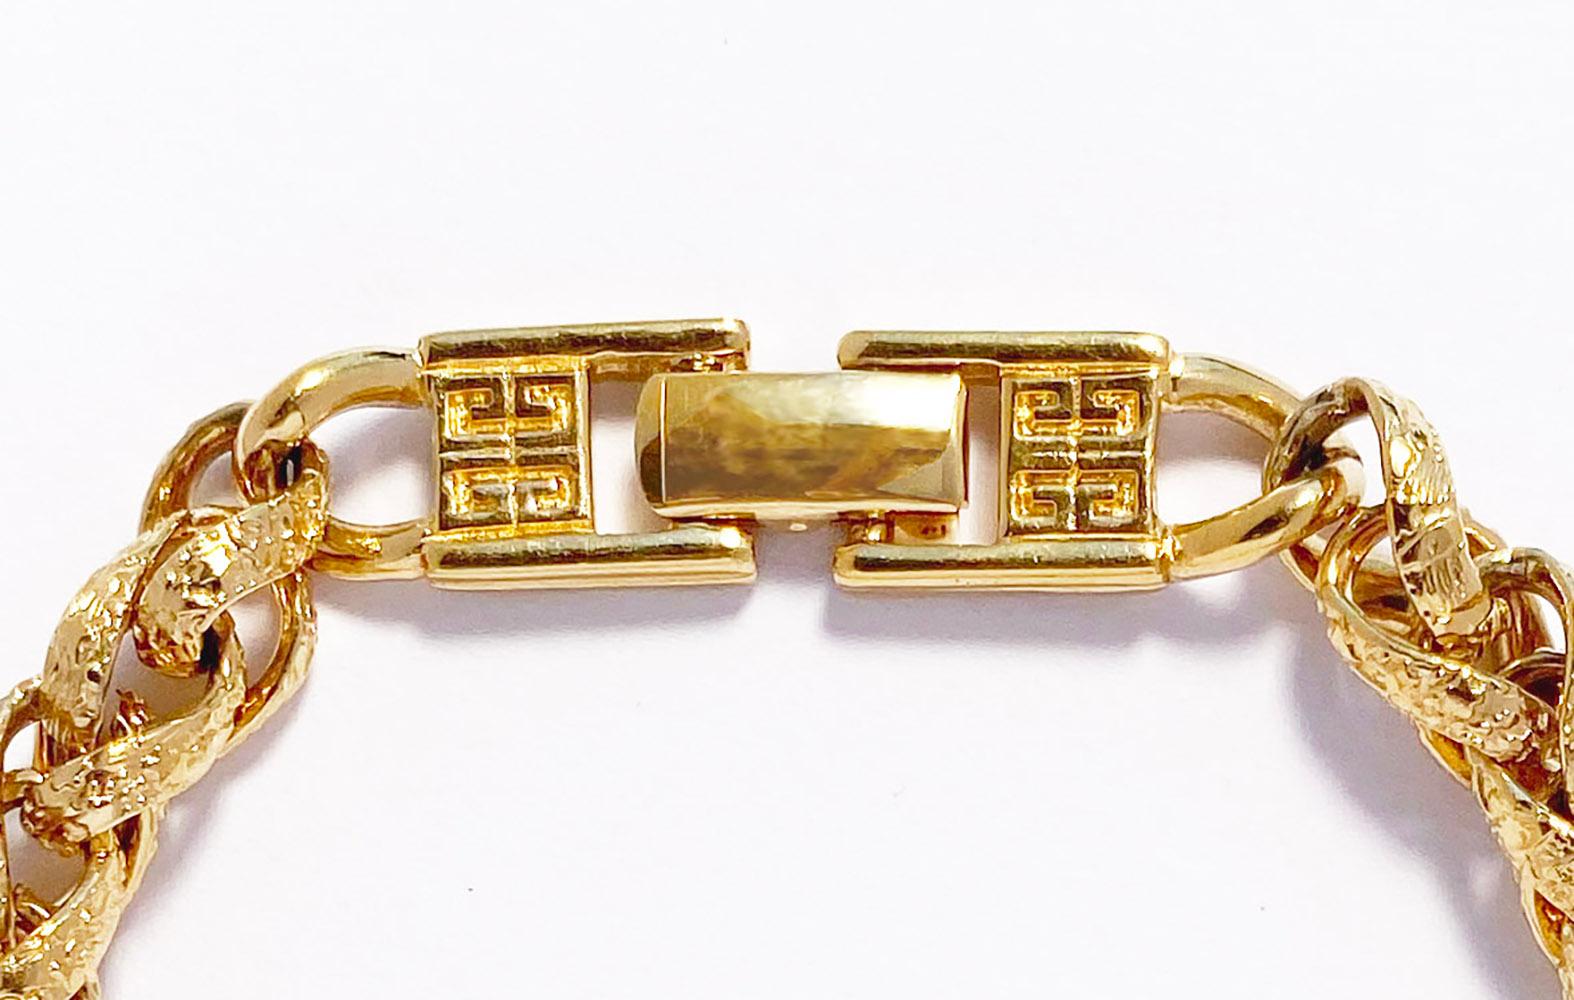 1980s Vintage Givenchy Byzantine link chain bracelet in gold plate.  This vintage bracelet features ornate textured links with a signature Givenchy logo clasp.   Bracelet measures 7 1/4 inches in length, width approximately 3/8 inch with a foldover